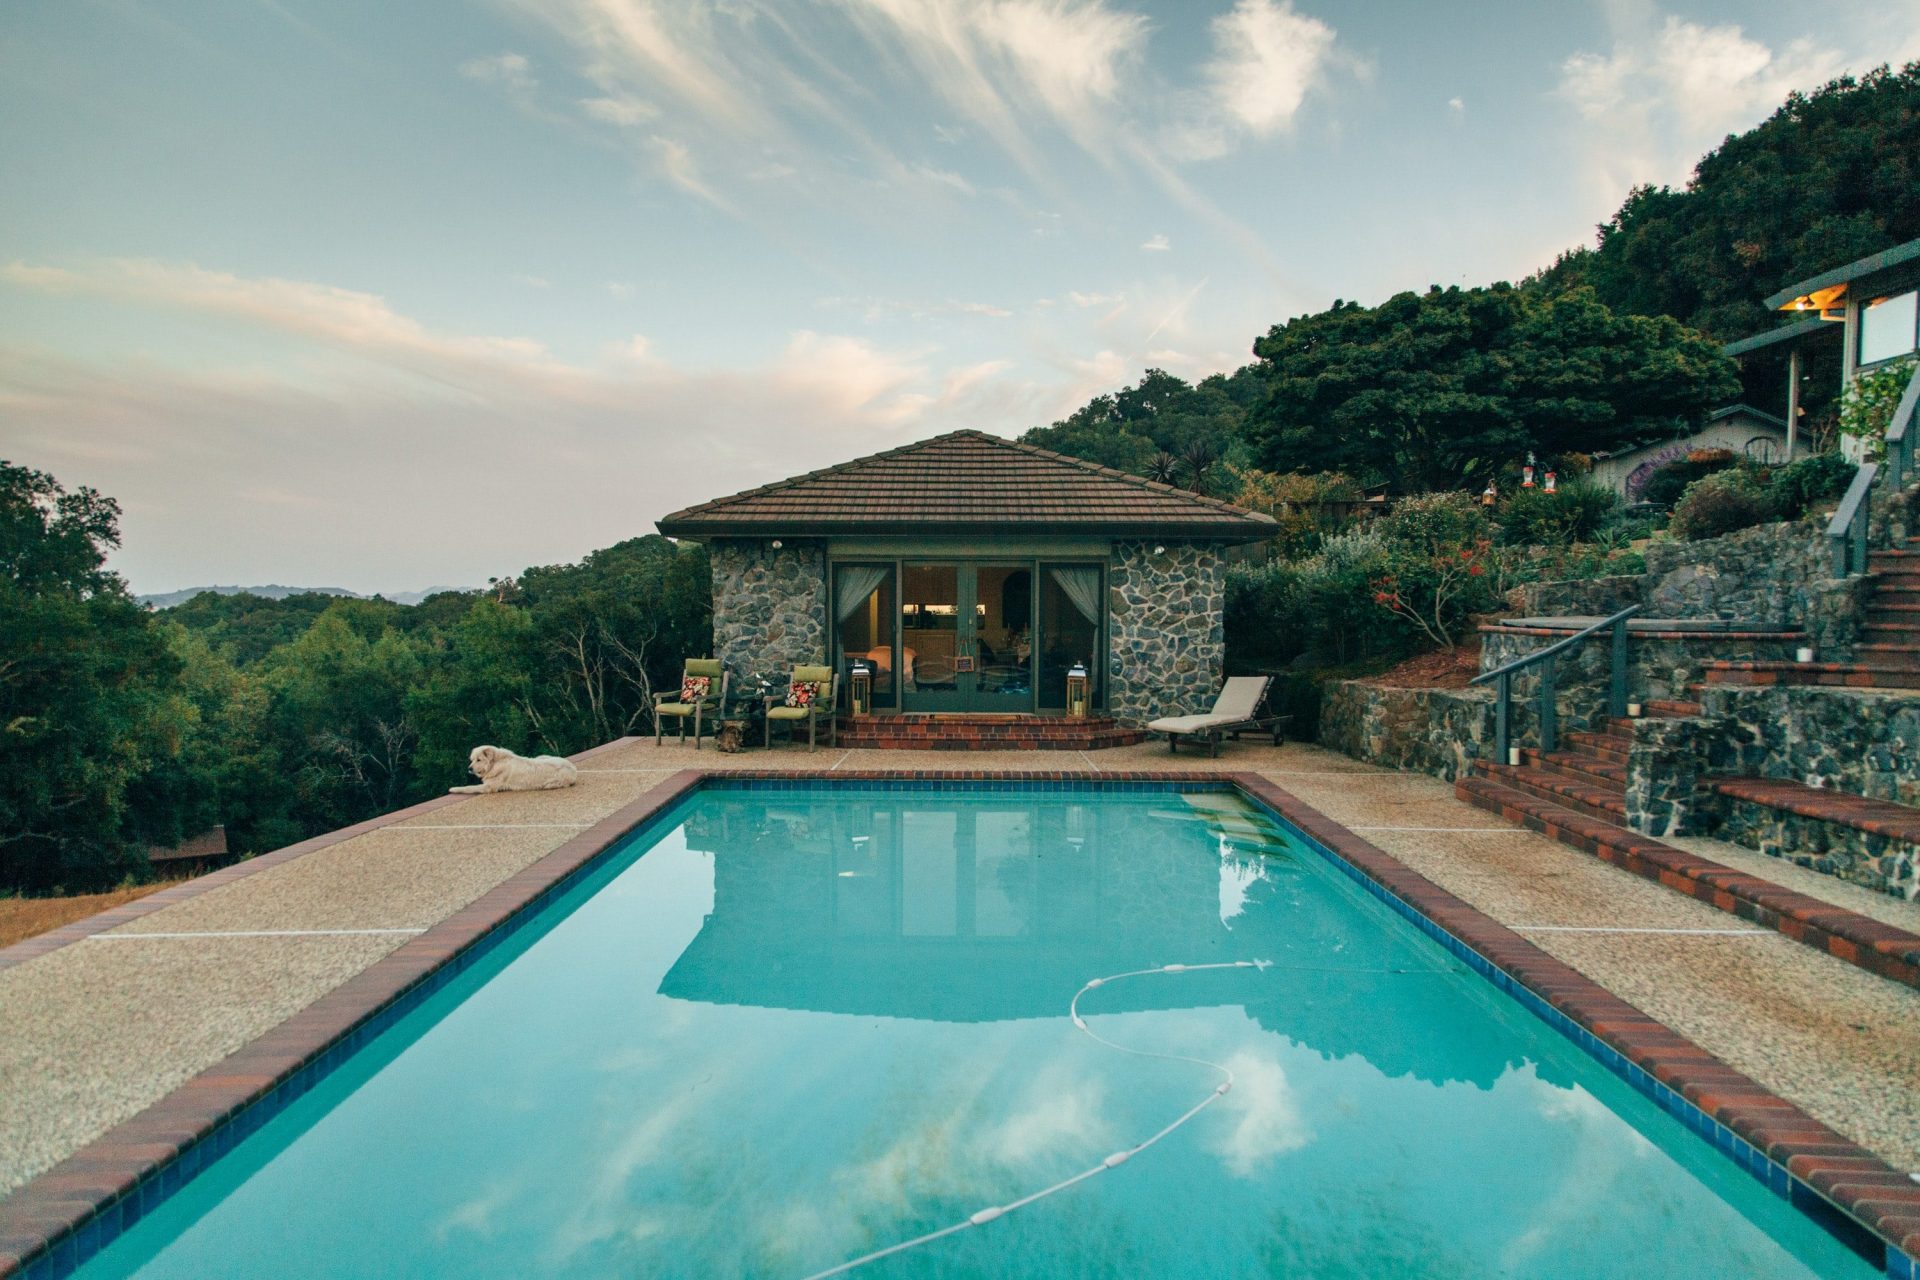 Swimming pool and a concrete patio with a hilltop backdrop.